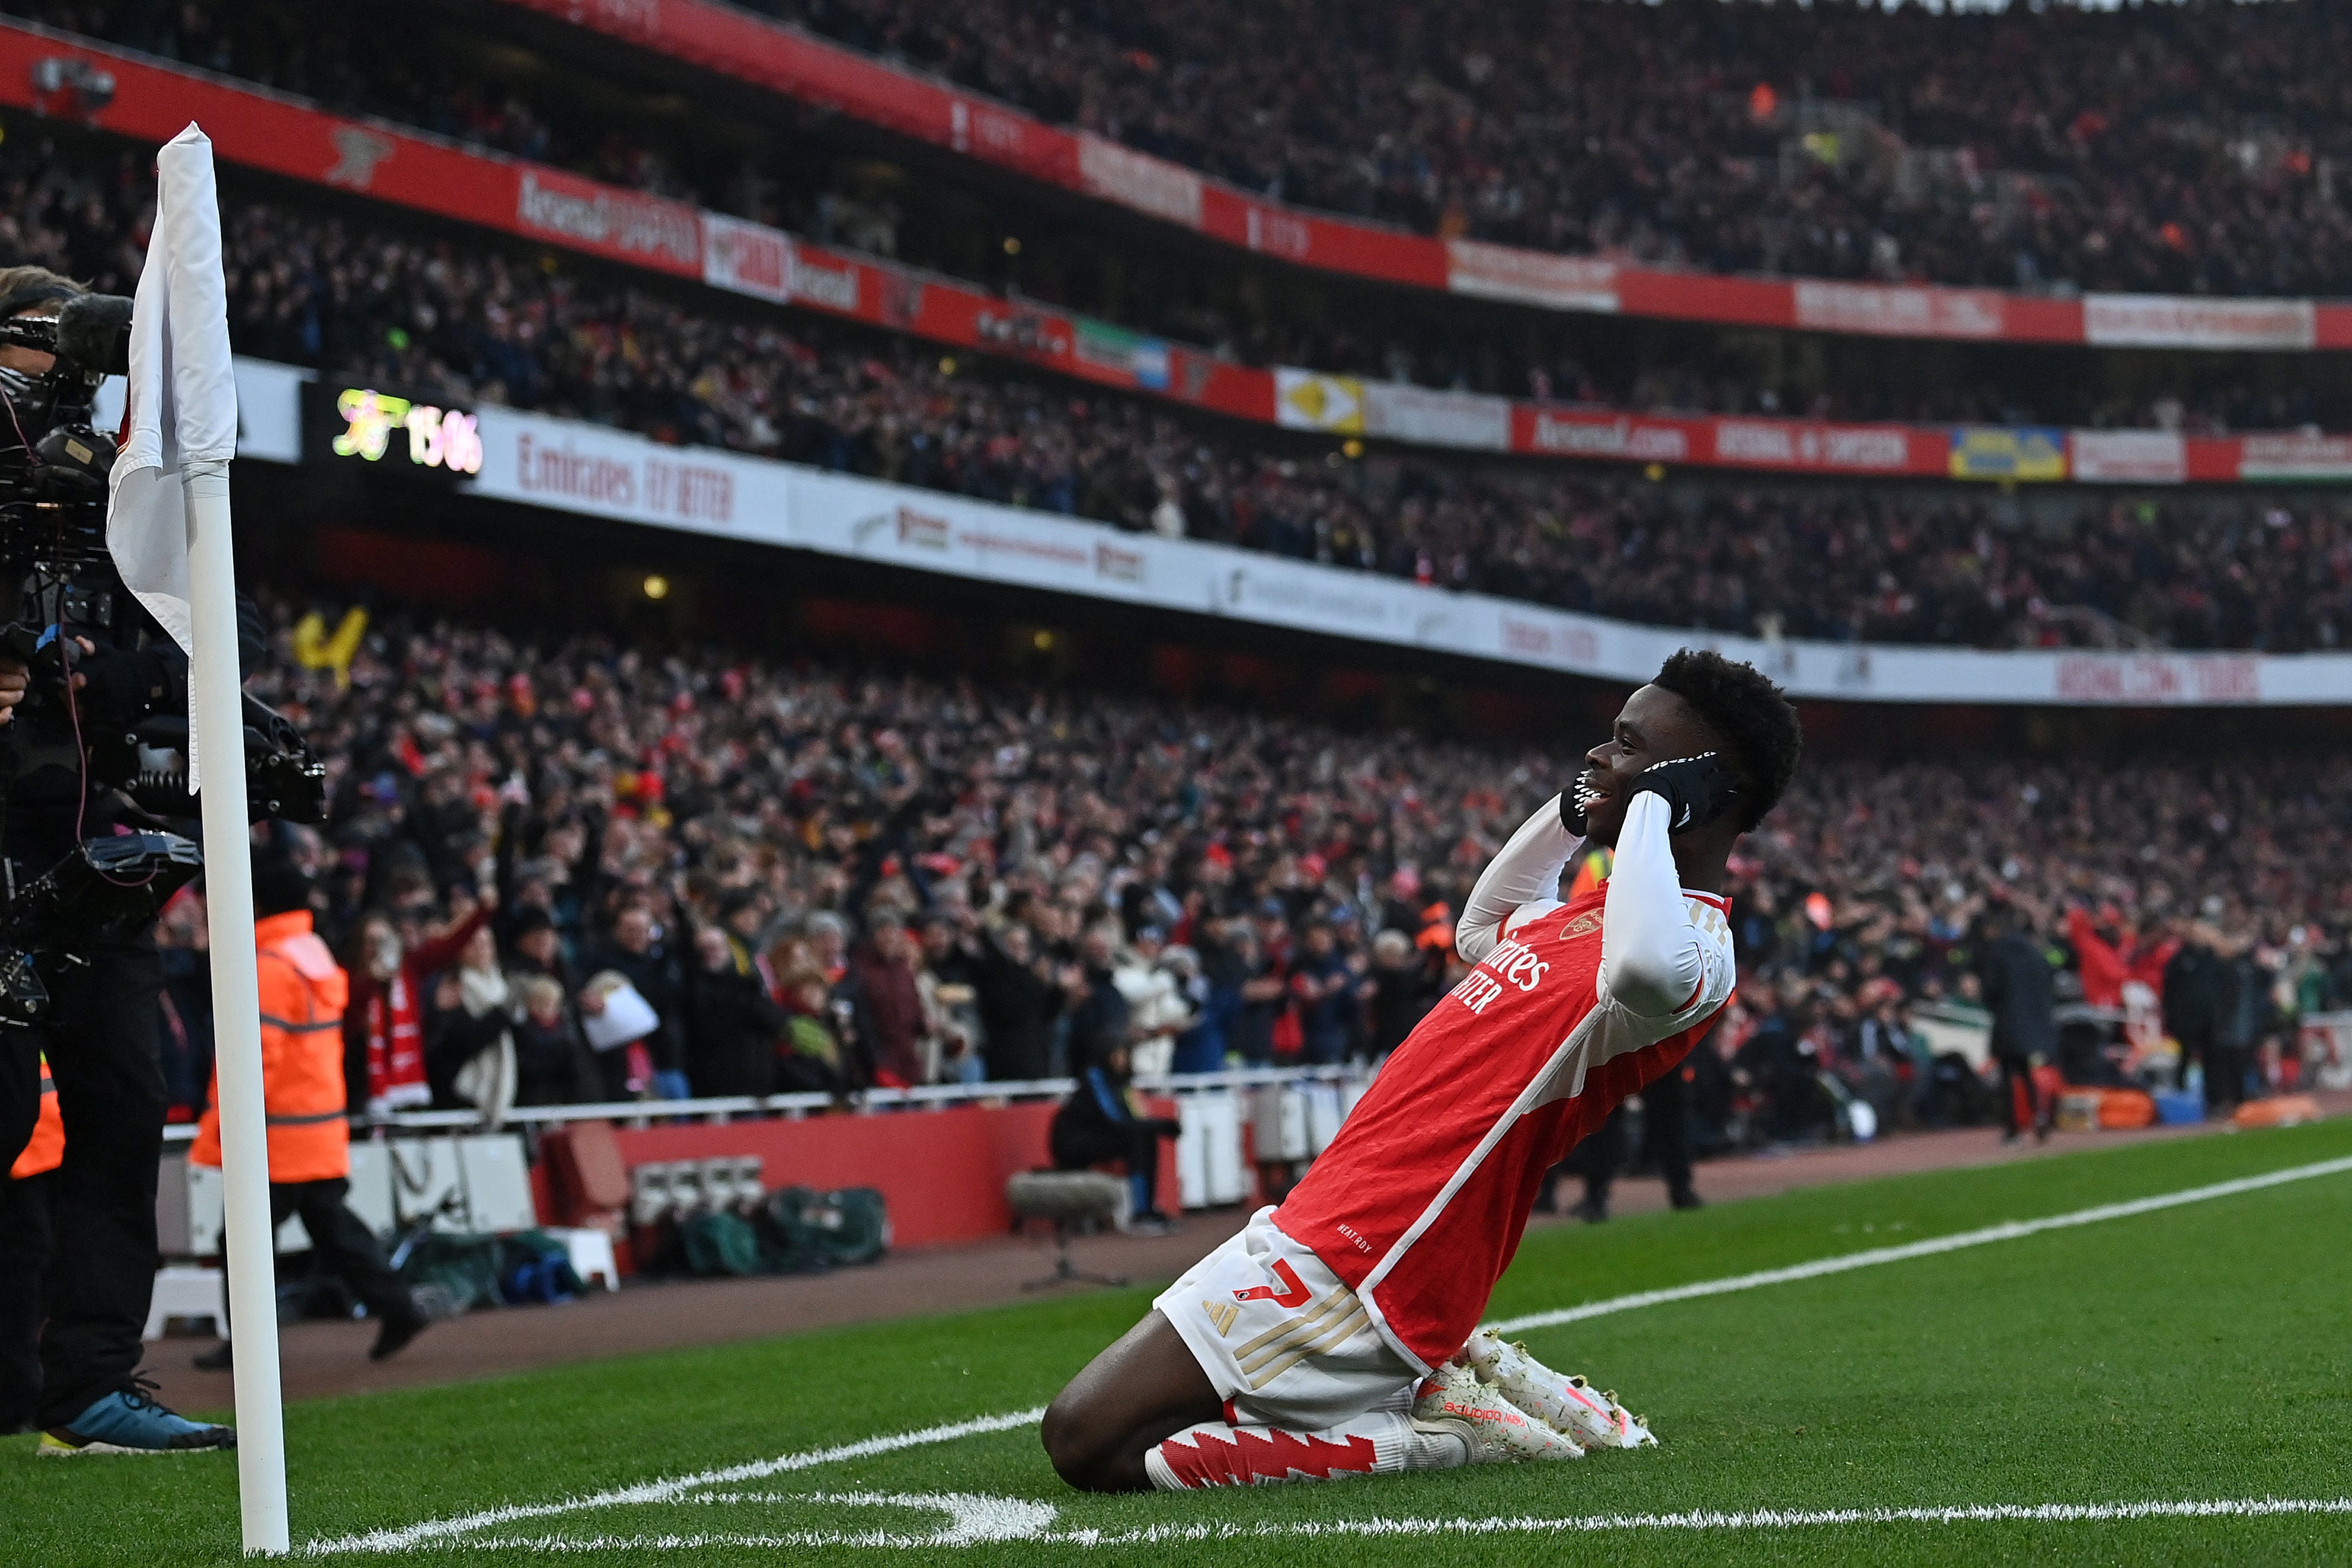 Bukayo Saka was on target for Arsenal in a 2-1 win over Wolves